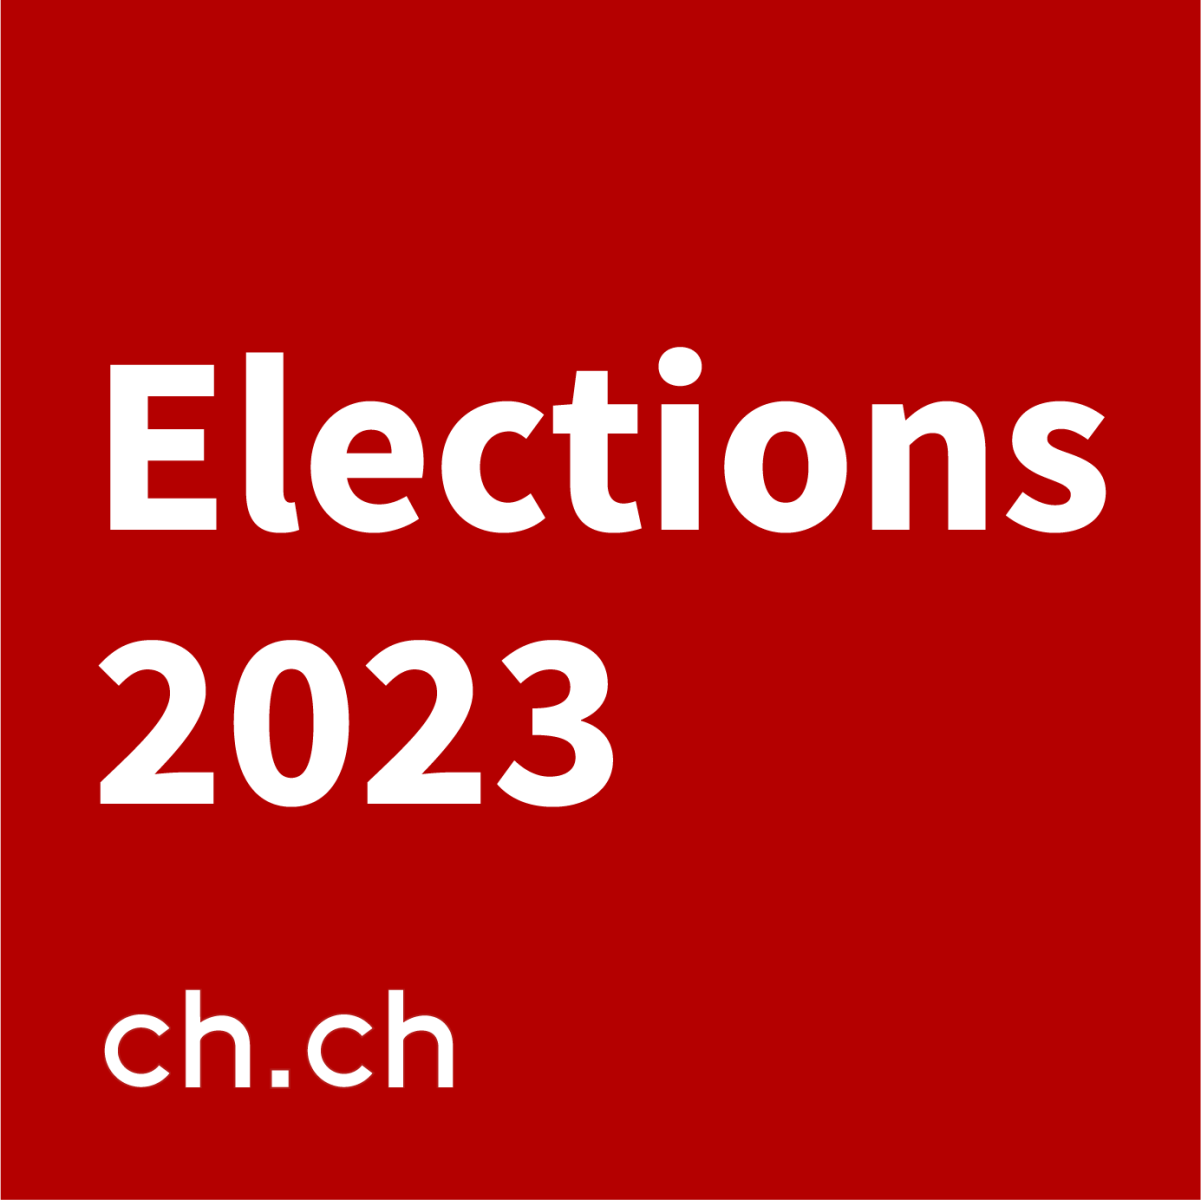 Elections 2023 - ch.ch